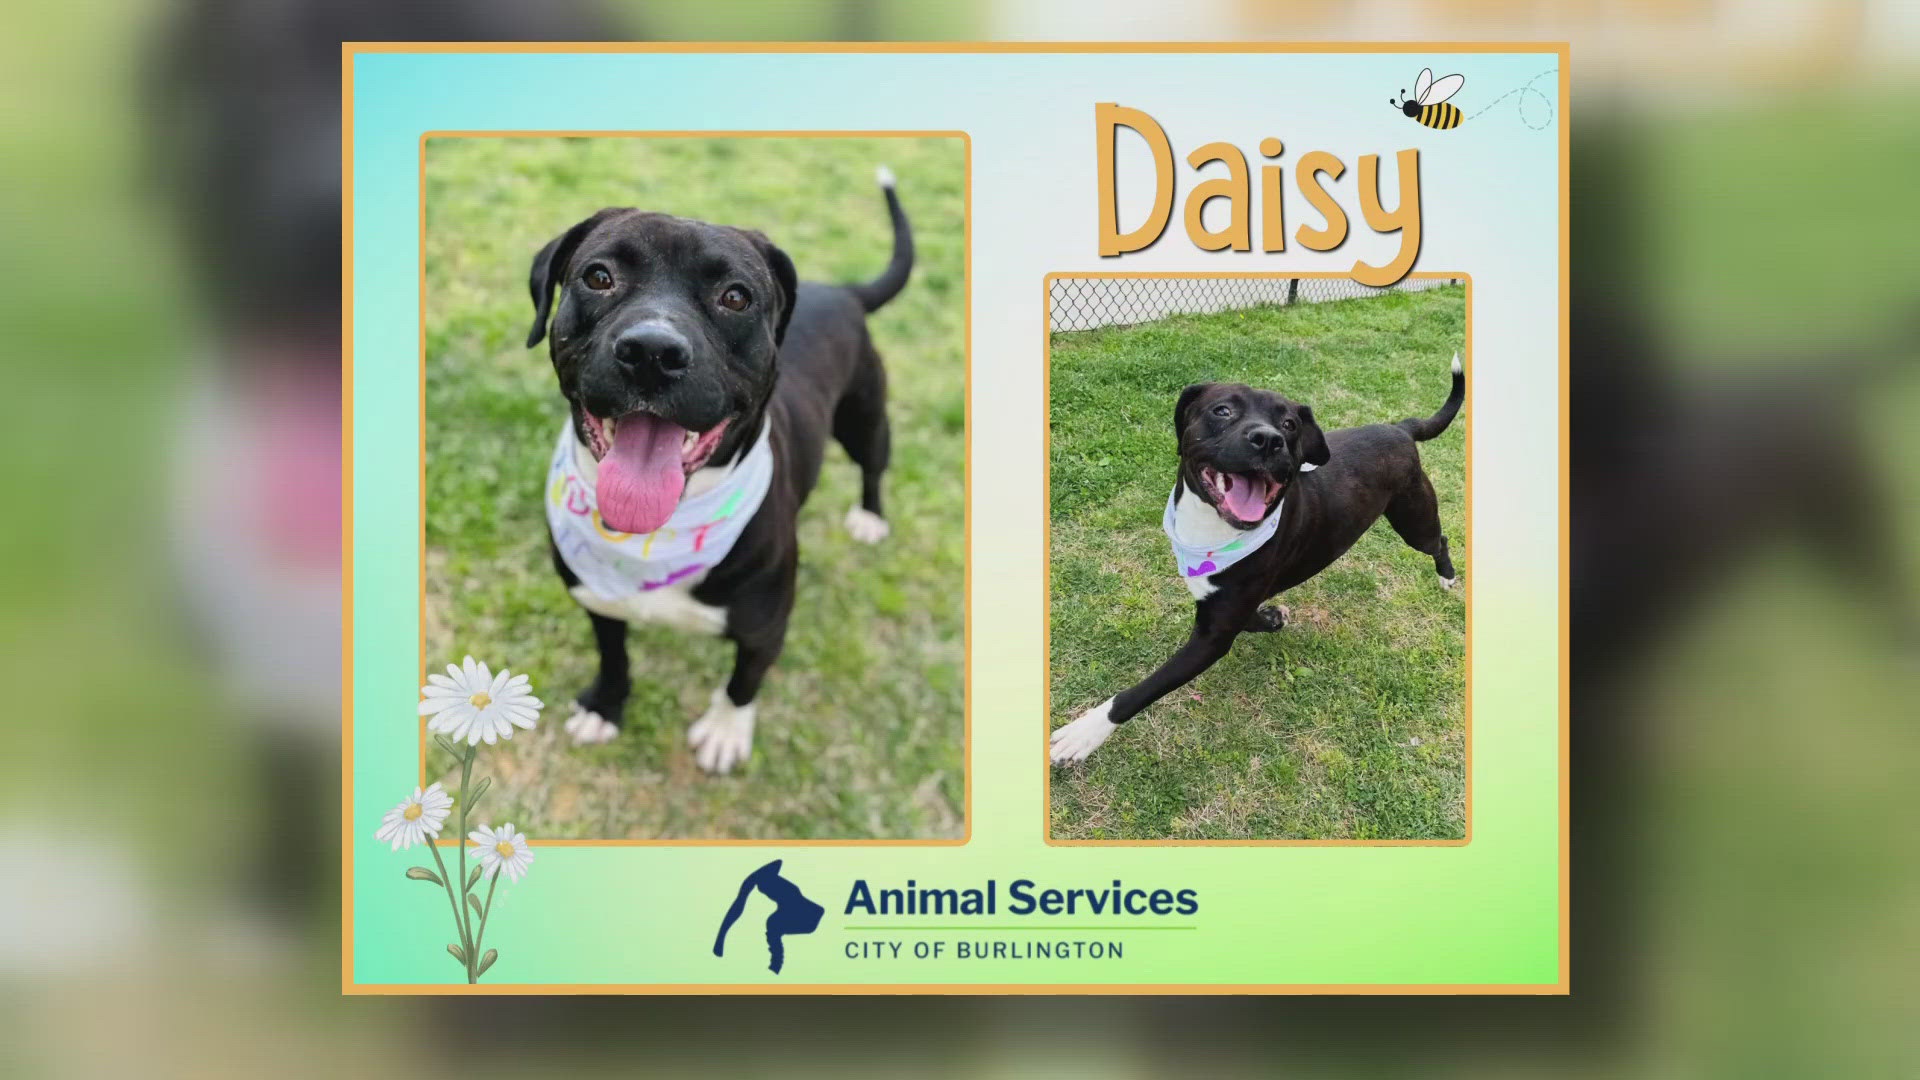 Let's get Daisy adopted!